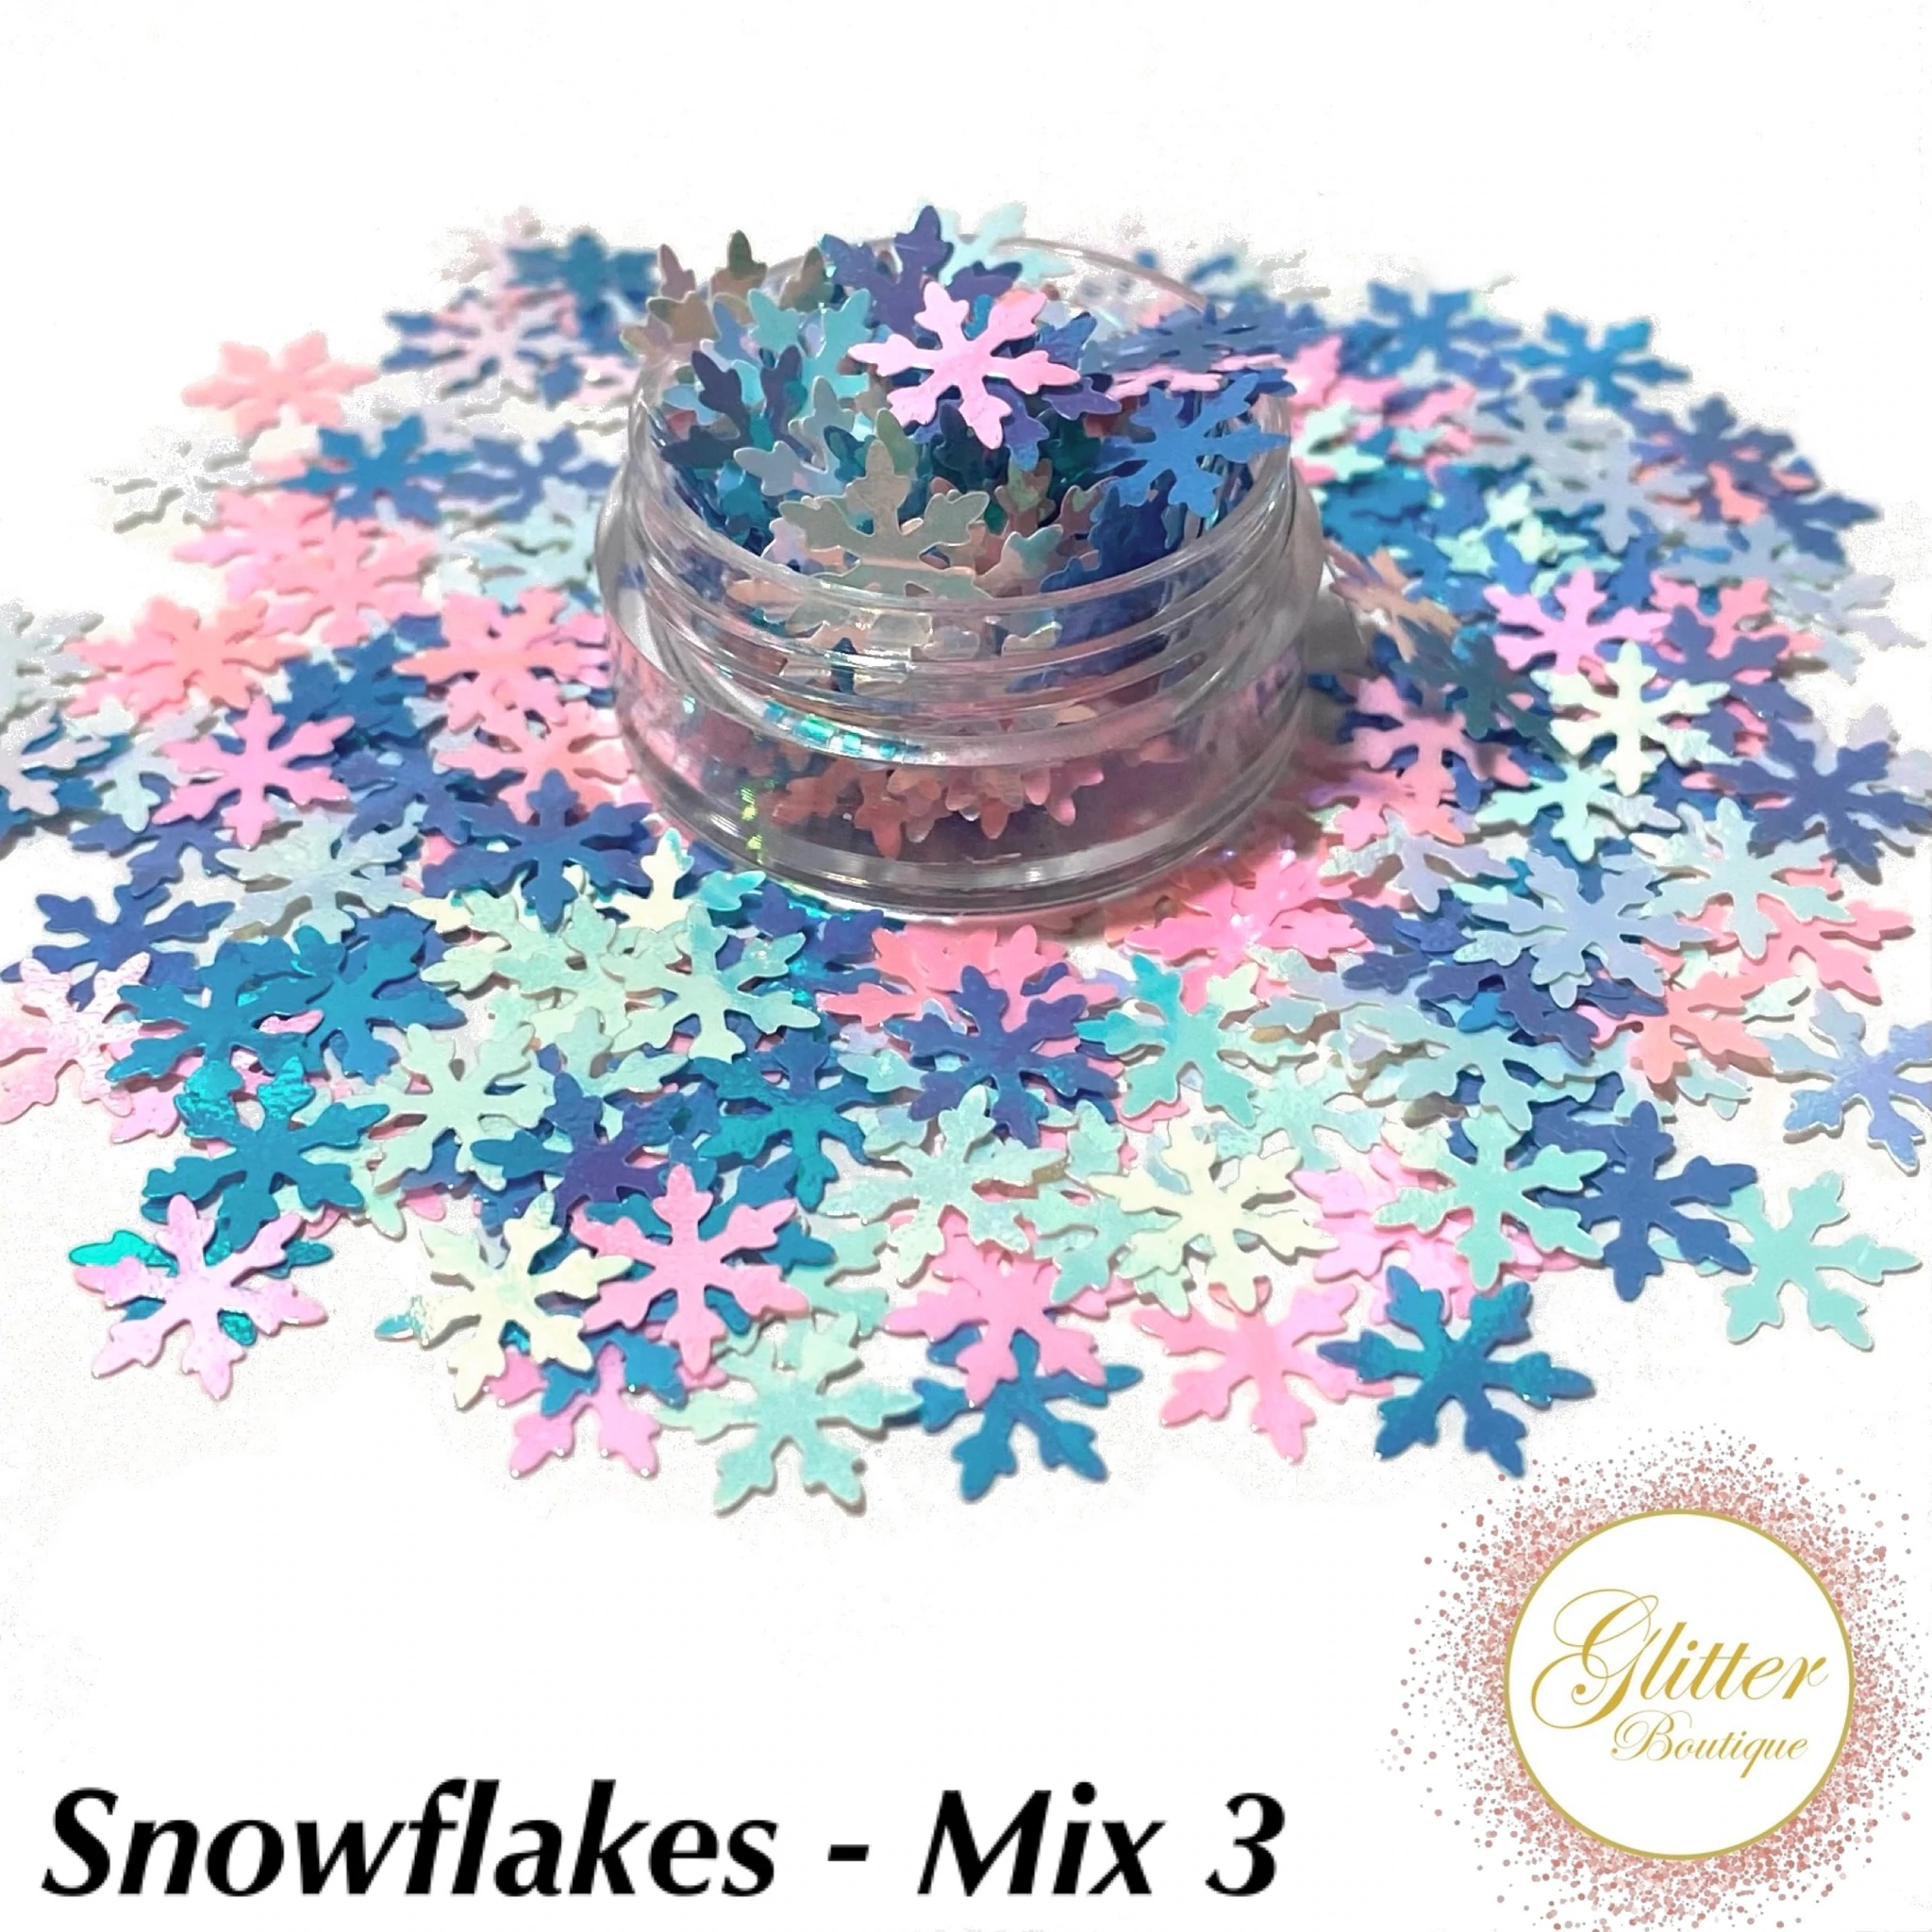 Glitter Boutique - Snowflakes Mix 3 - Creata Beauty - Professional Beauty Products